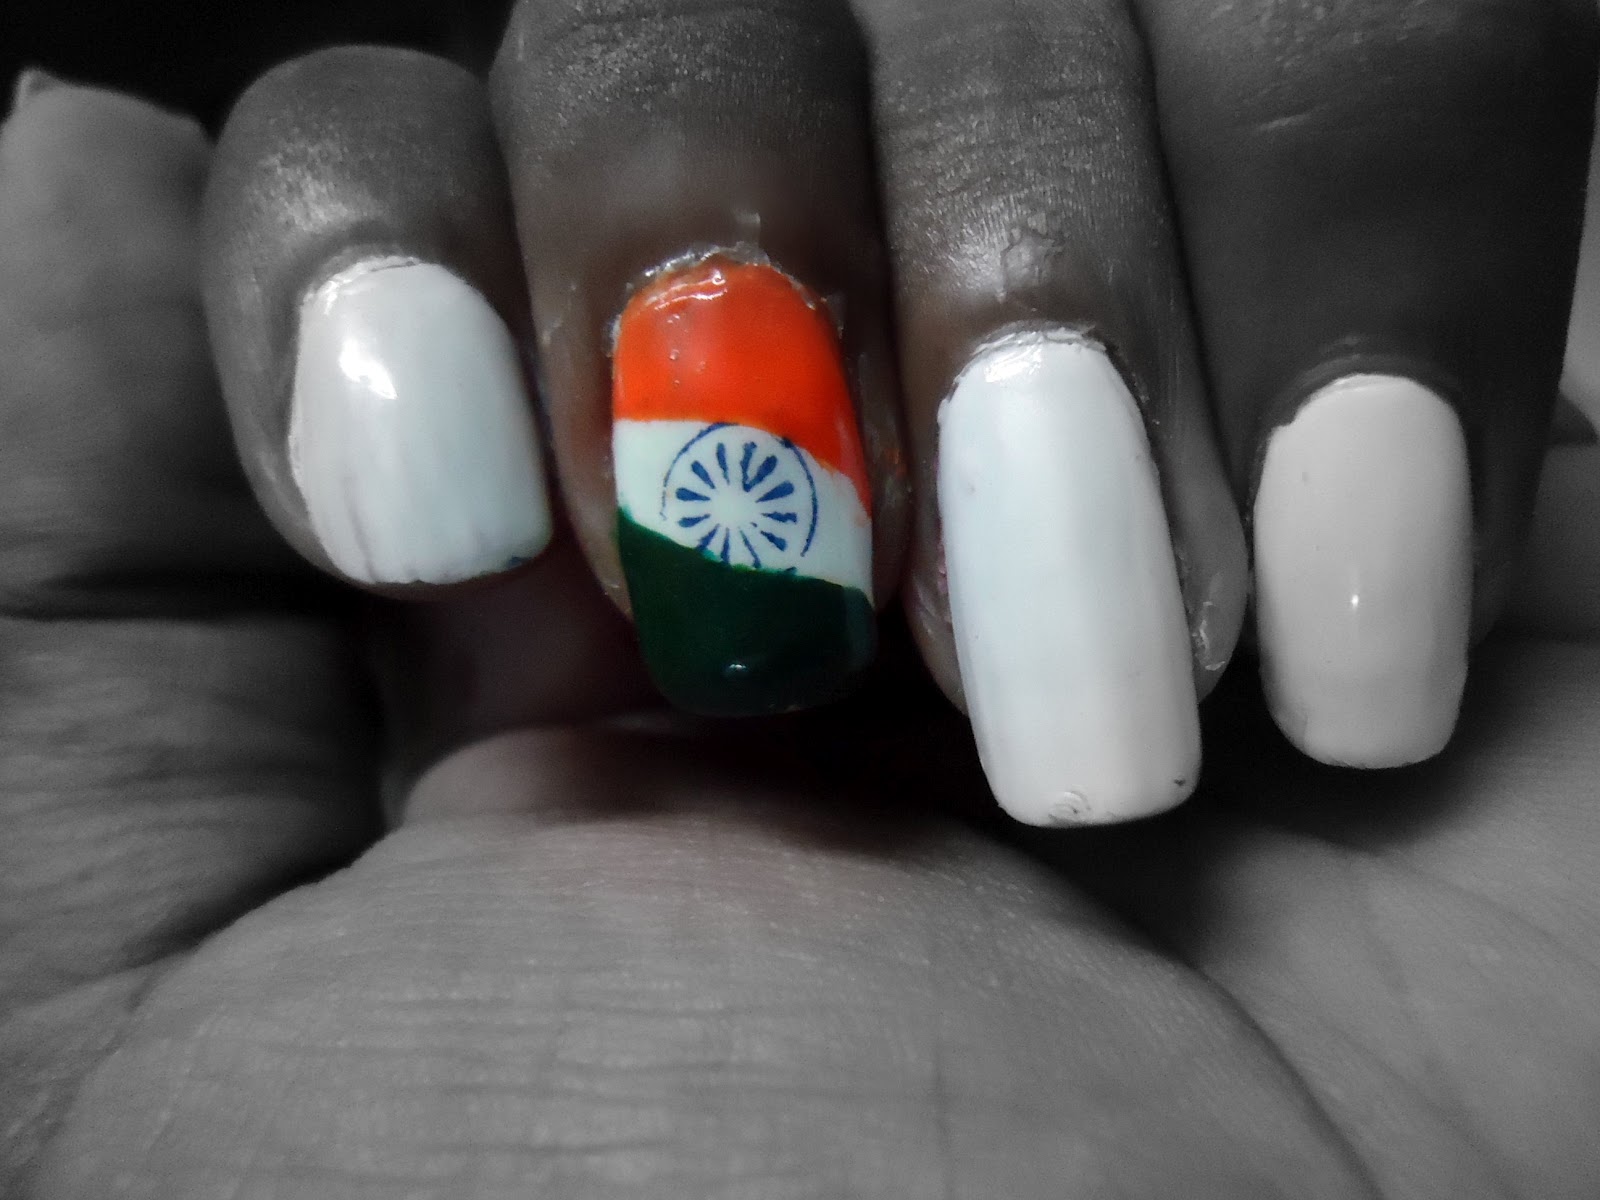 Indian Tricolor nail art- Celebrate the colors of freedom on your nails